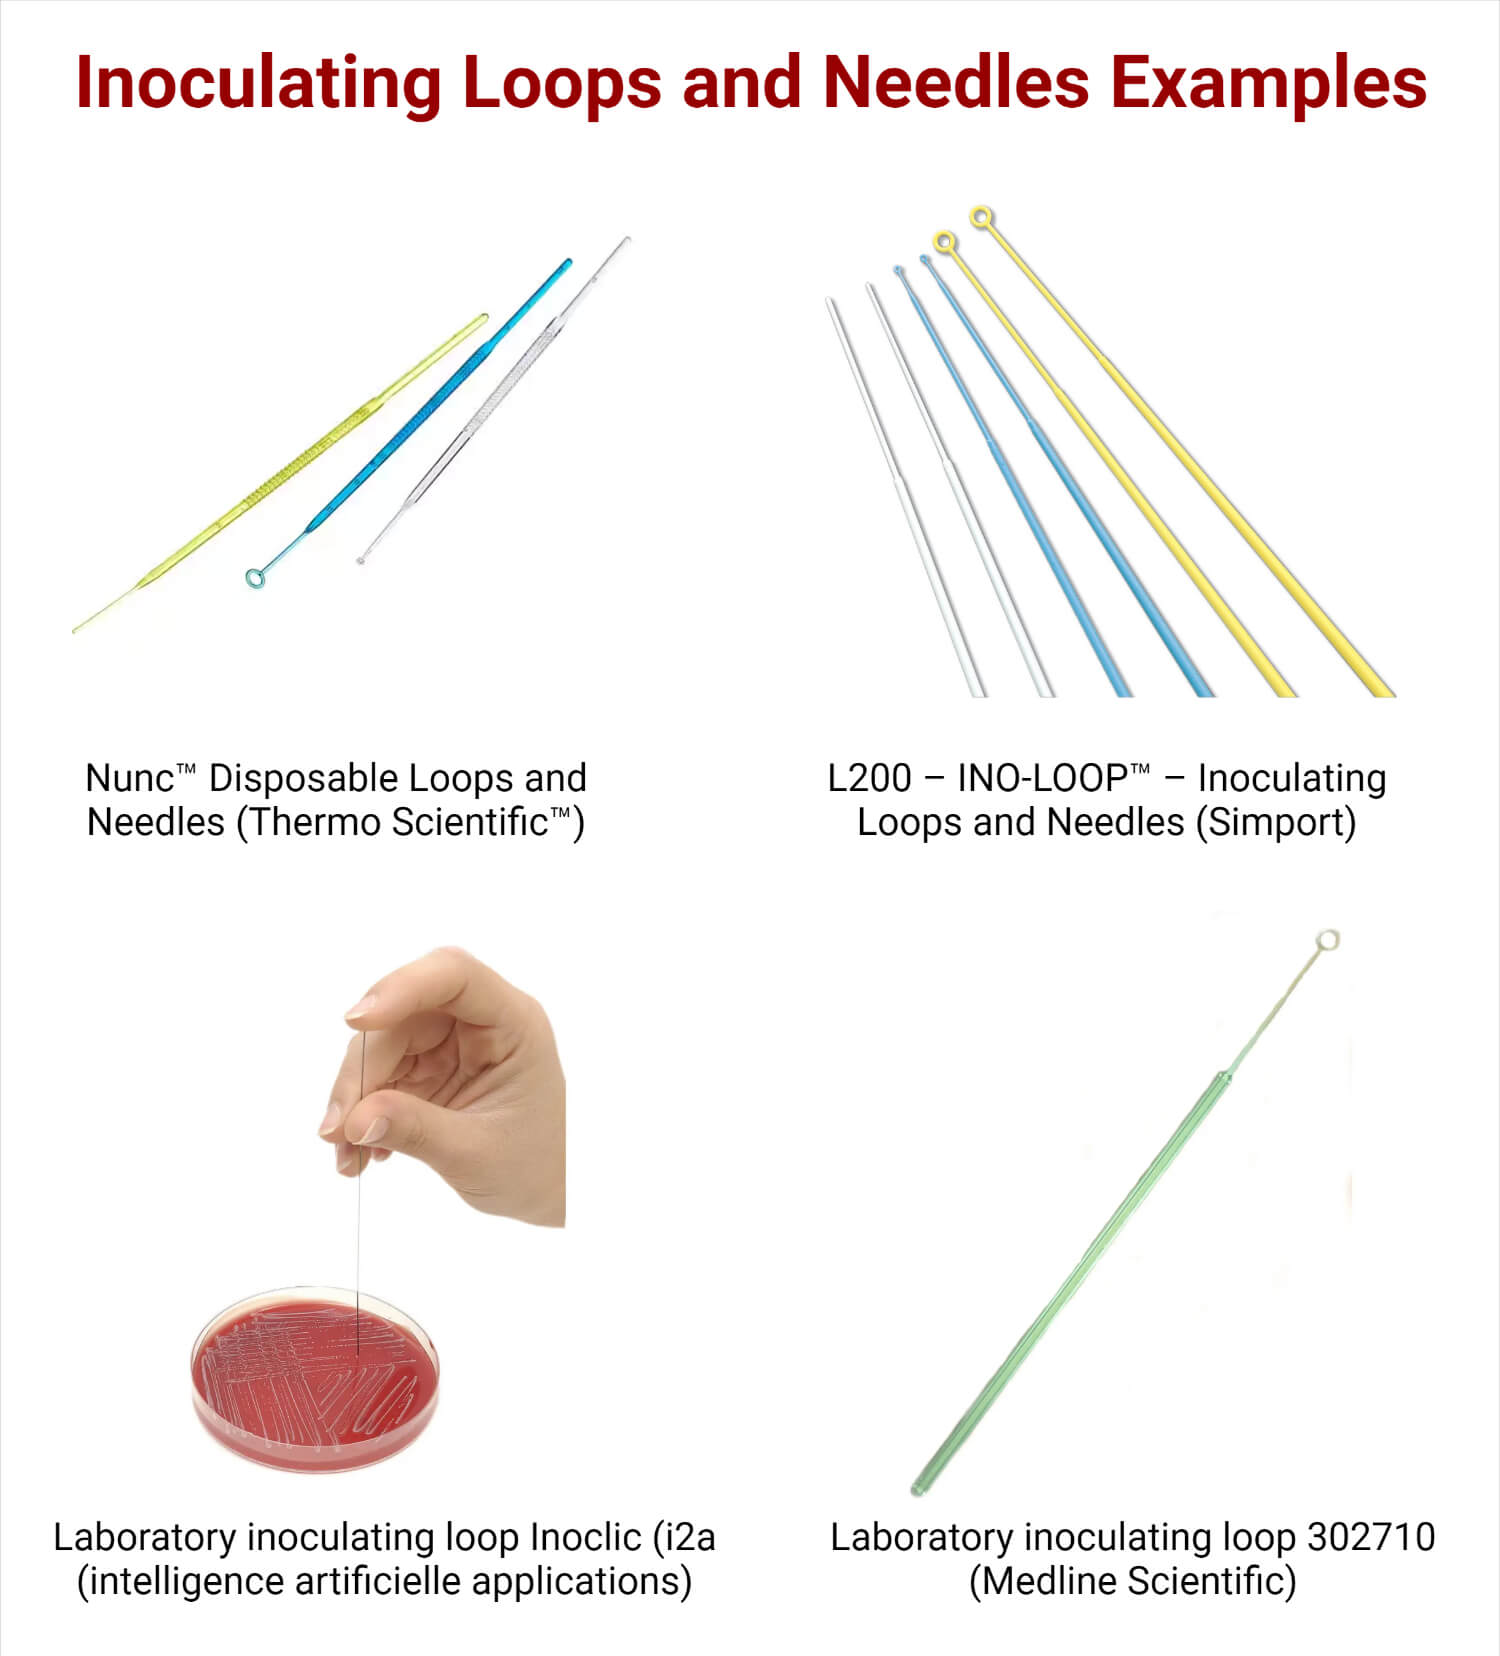 Inoculating Loops and Needles Examples